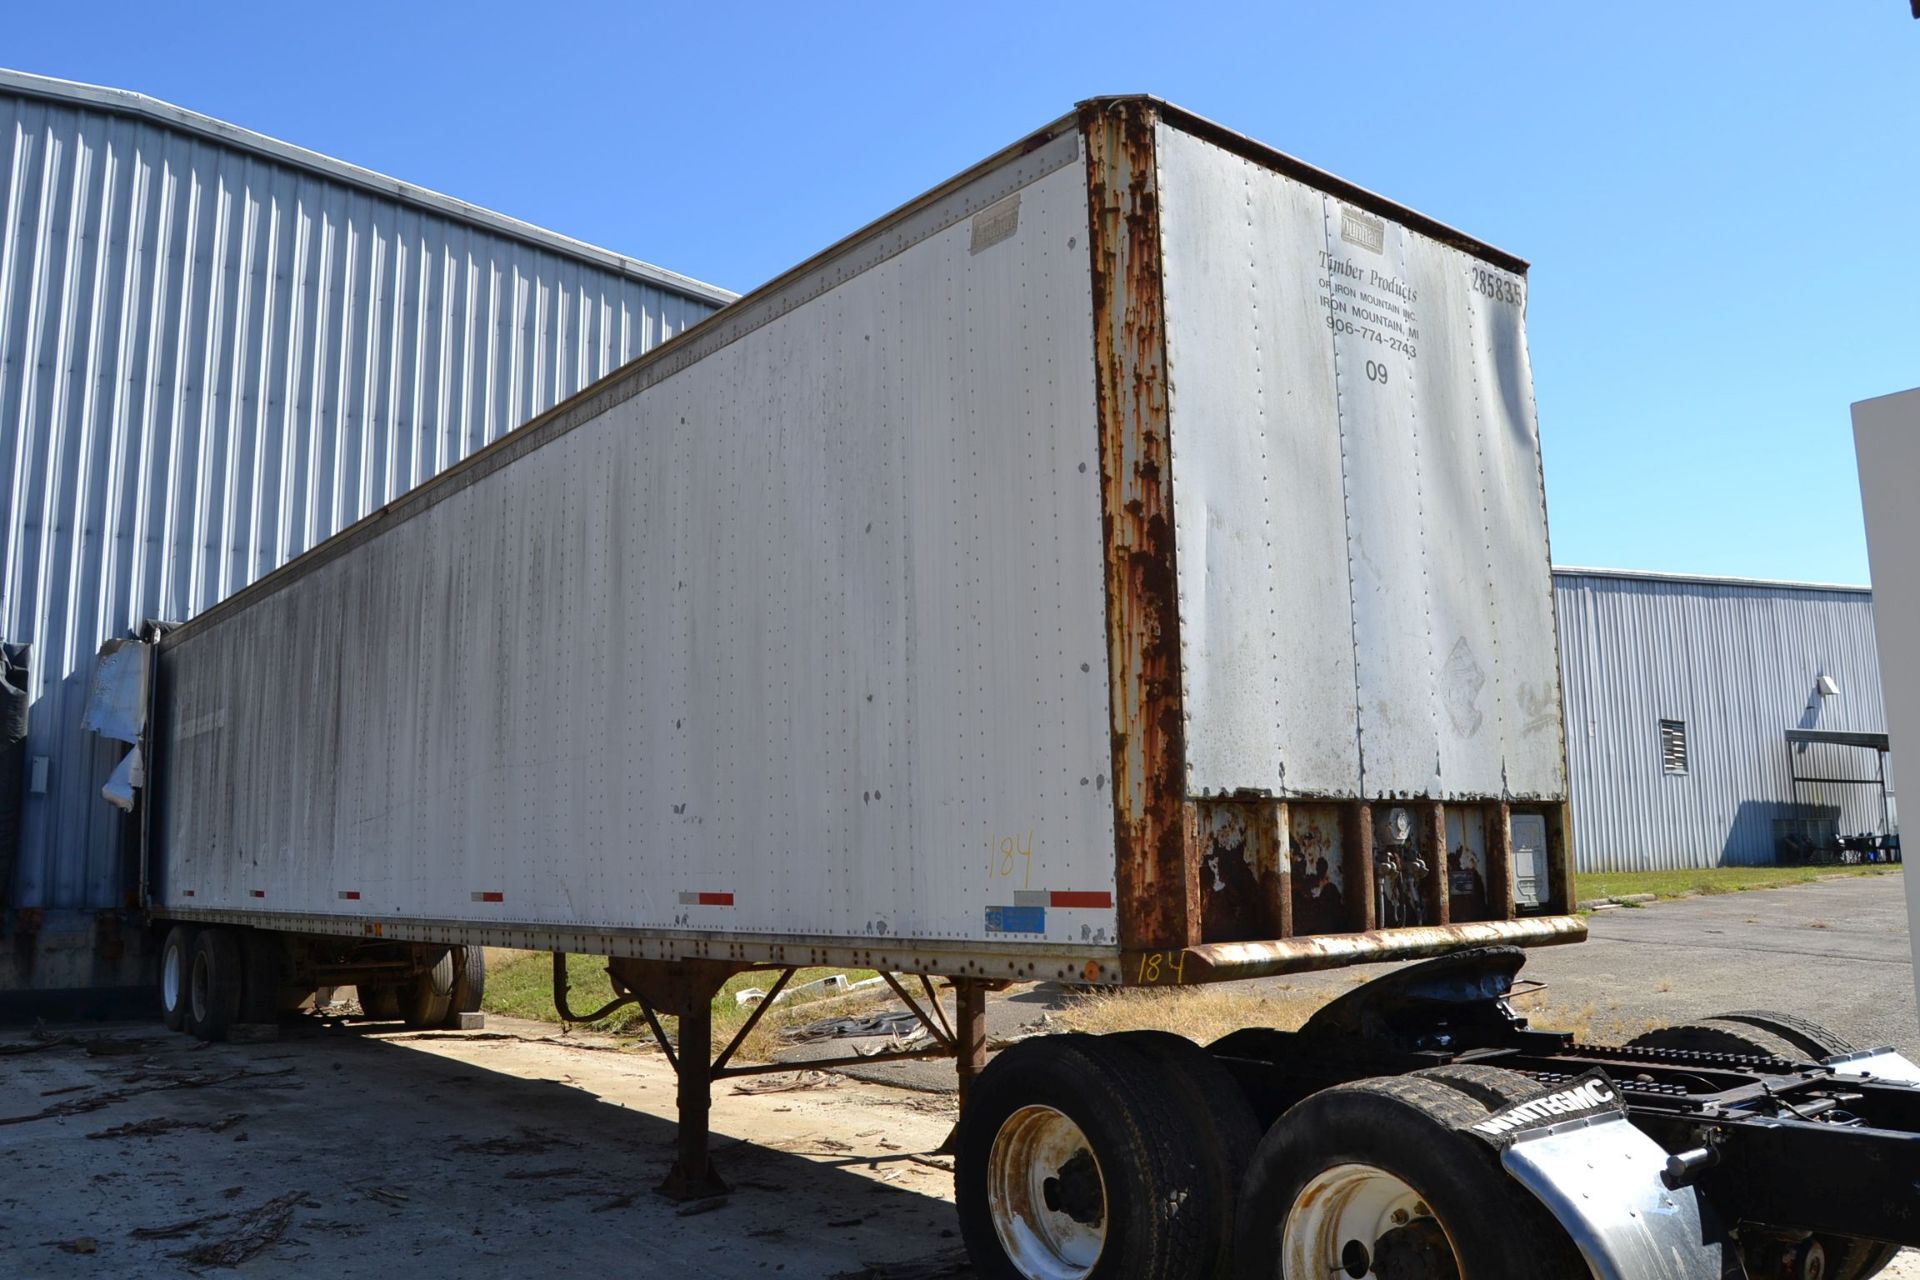 1984 DUNHAM 48' BOX TRAILER (NO TITLE) USED AS STORAGE TRAILER NO TITLE SN# 5560 - Image 2 of 2